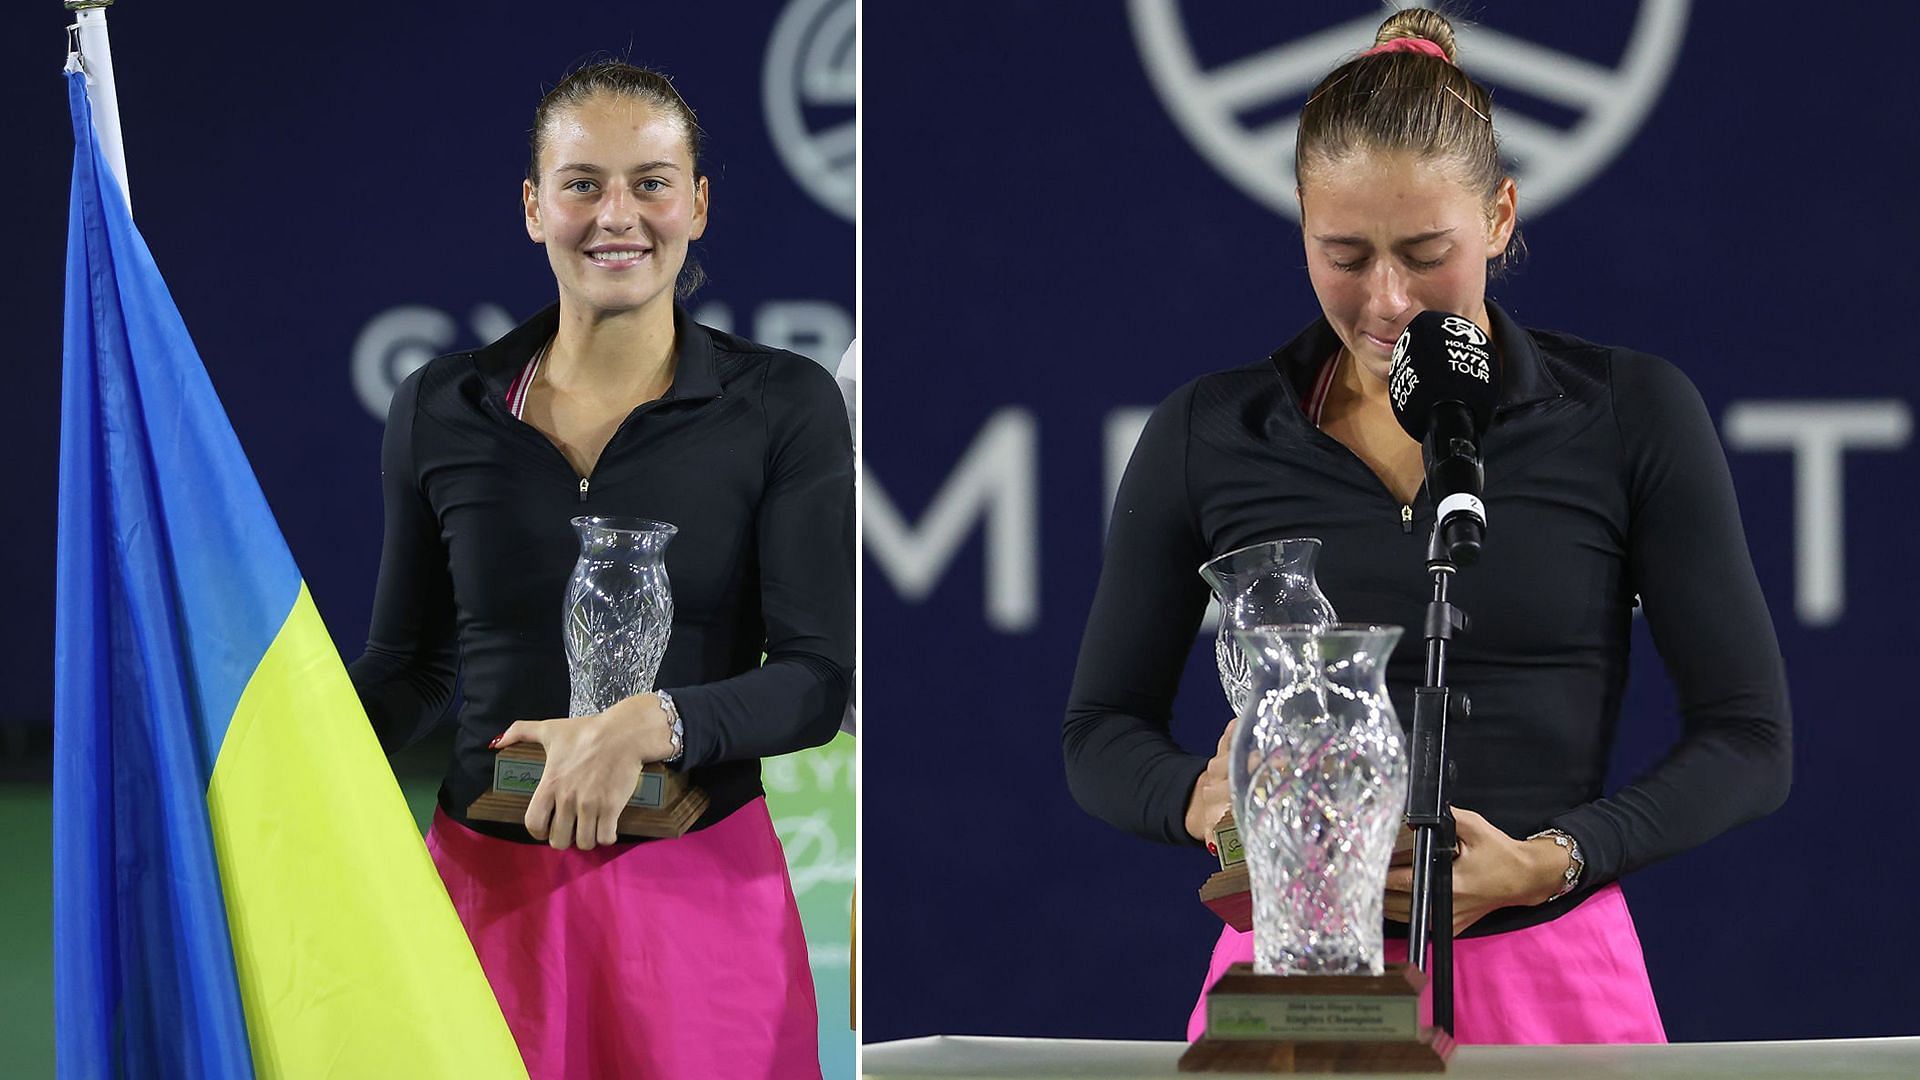 Marta Kostyuk was in tears as she dedicated her San Diego runner-up trophy to her family